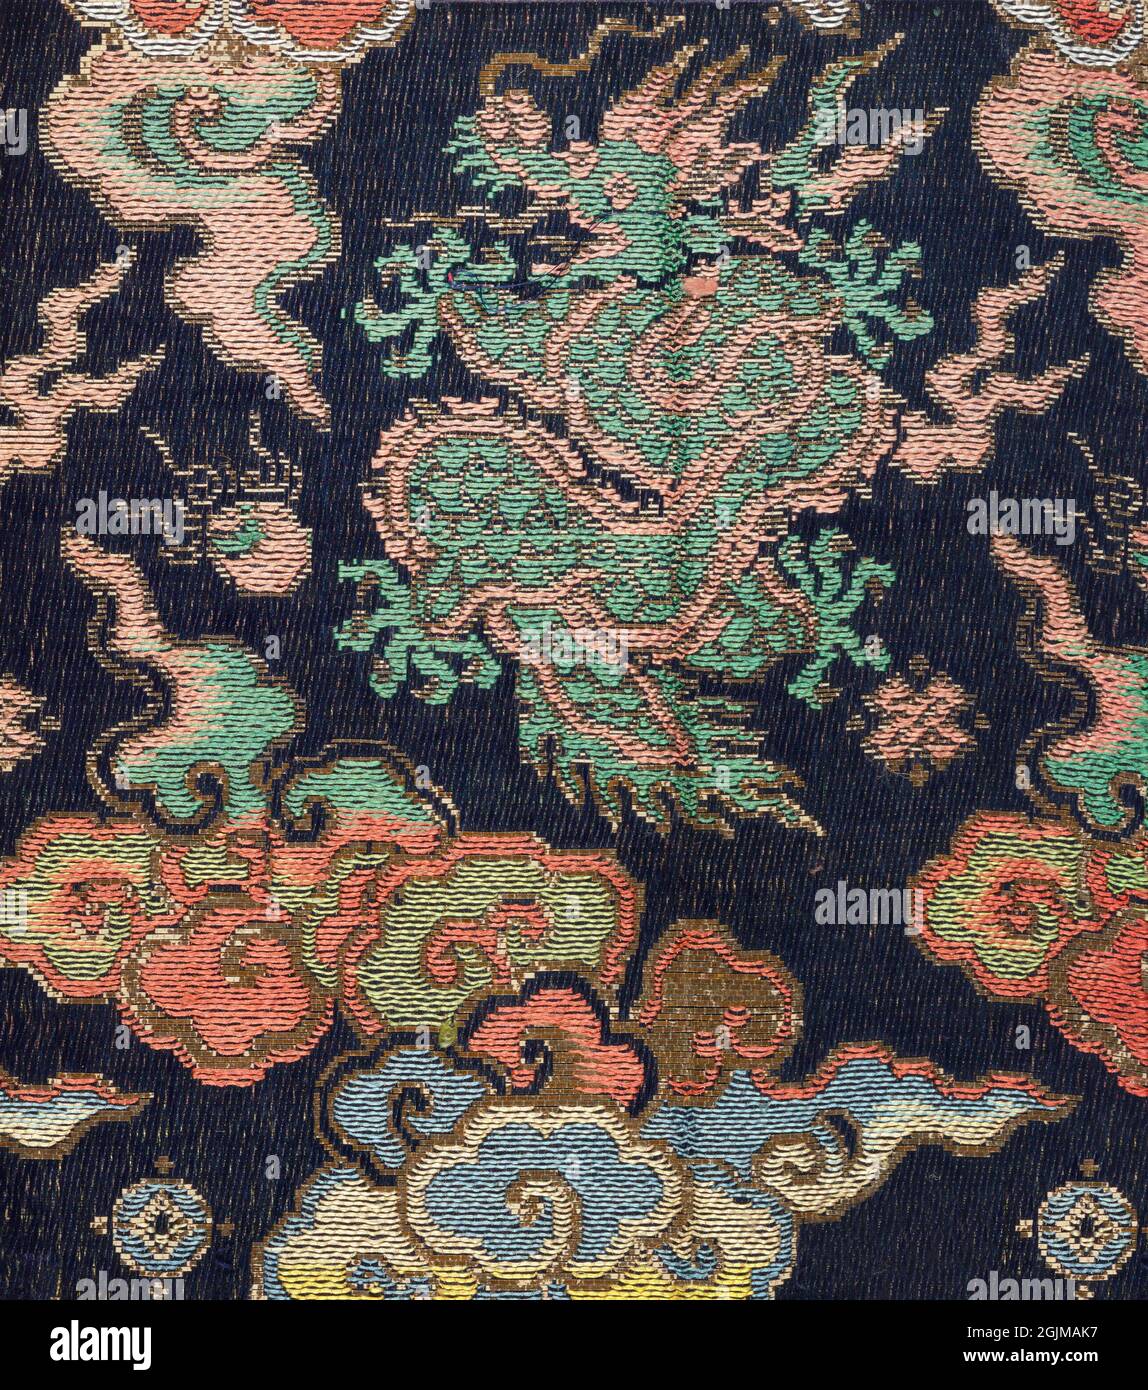 Brocaded Japanese textile depicting dragon and clouds, executed in sik and metallic threads on an indigo ground. Japan Stock Photo